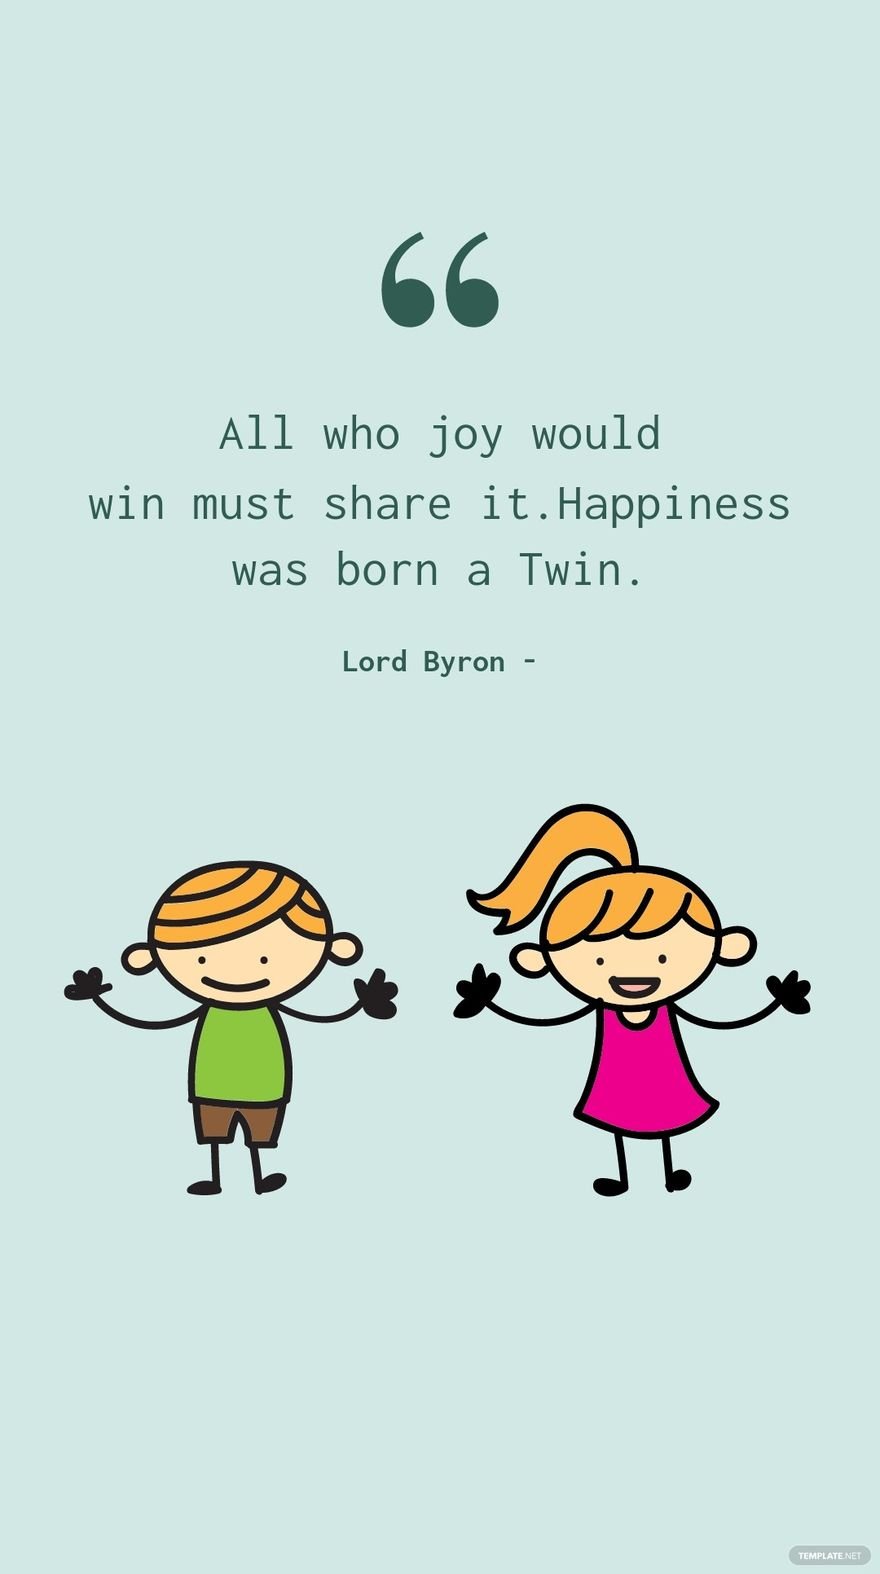 Free Lord Byron - All who joy would win must share it. Happiness was born a Twin. in JPG